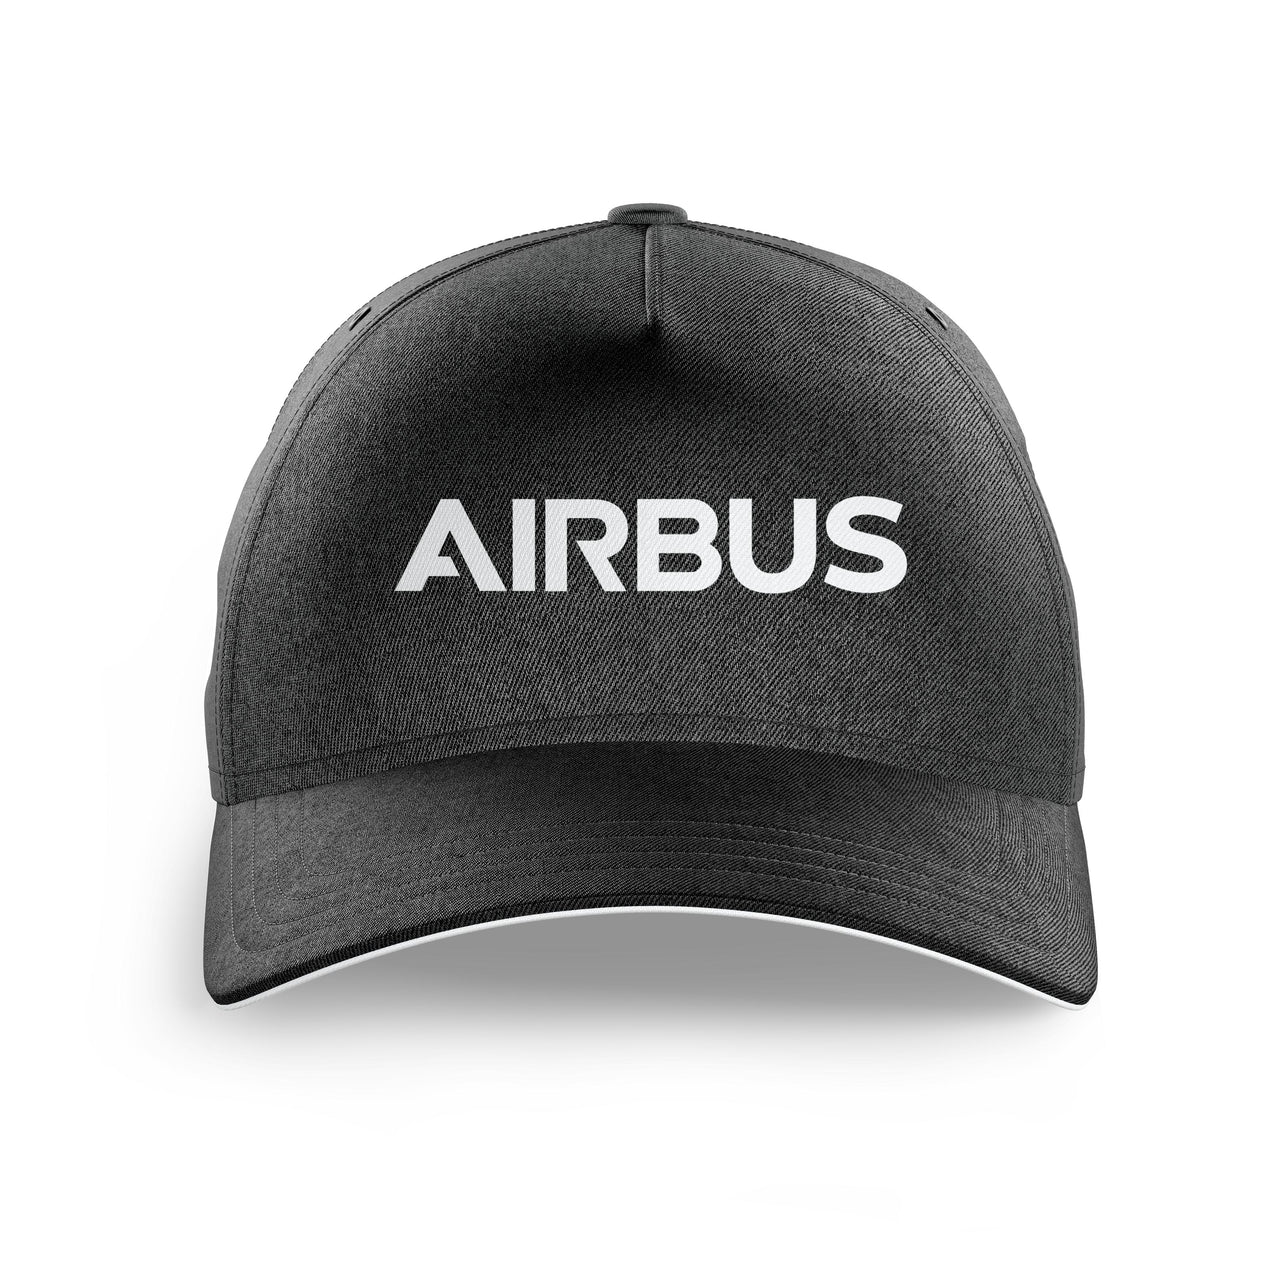 Airbus & Text Printed Hats